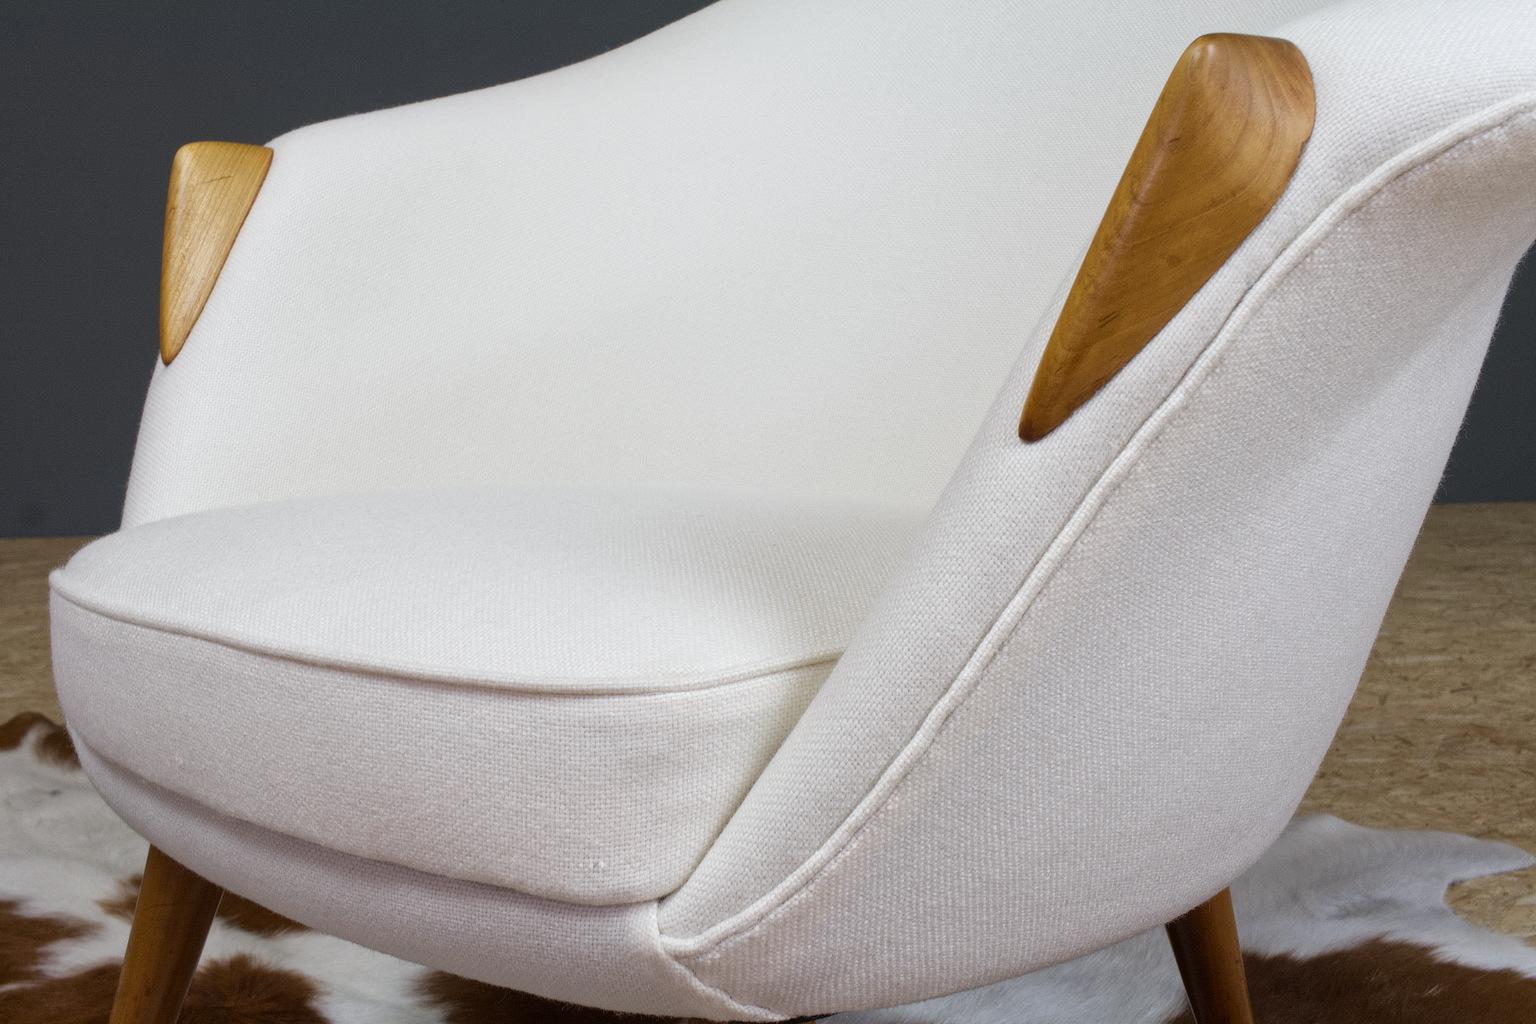 Fabric Scandinavian Modern Lounge Chair in Elm and White Wool Nanna Ditzel manner 1950s For Sale